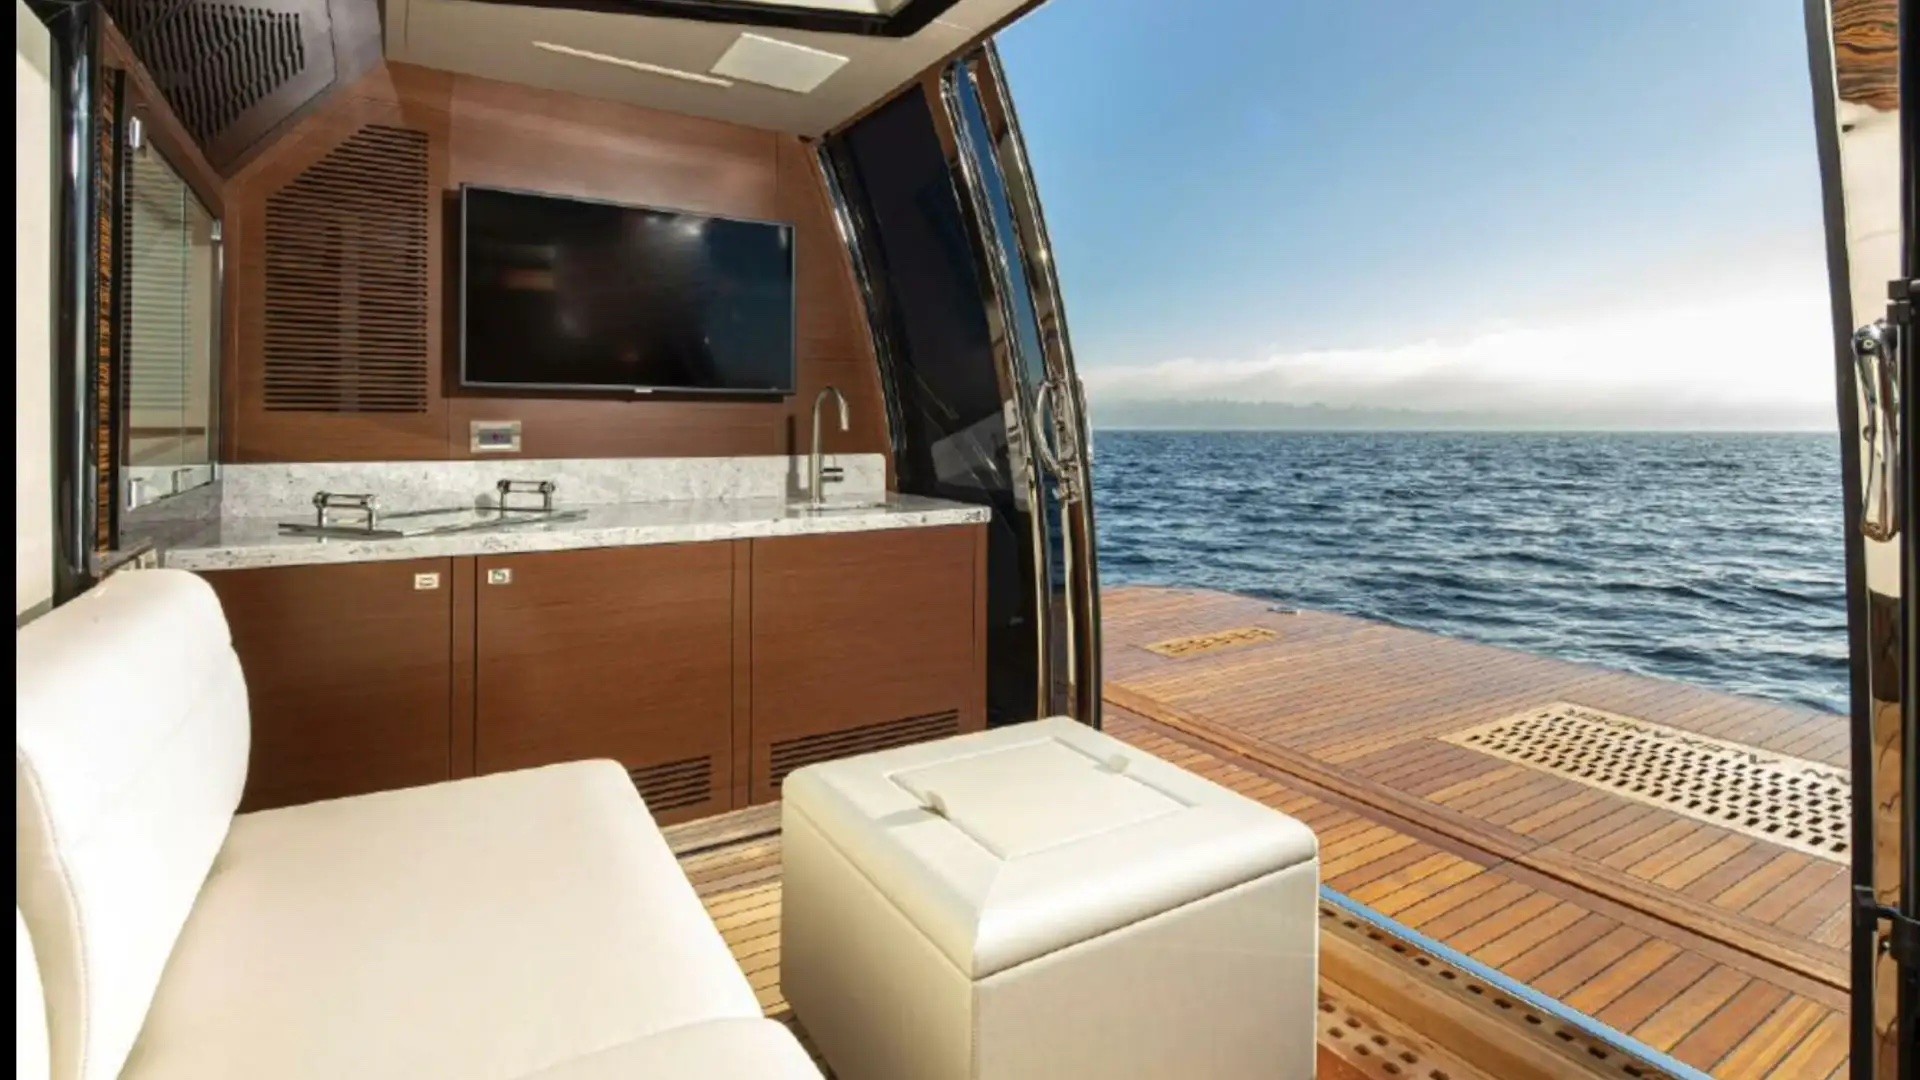 the golden standard for comfort and peace can be found in the 8 million tlc yacht 7